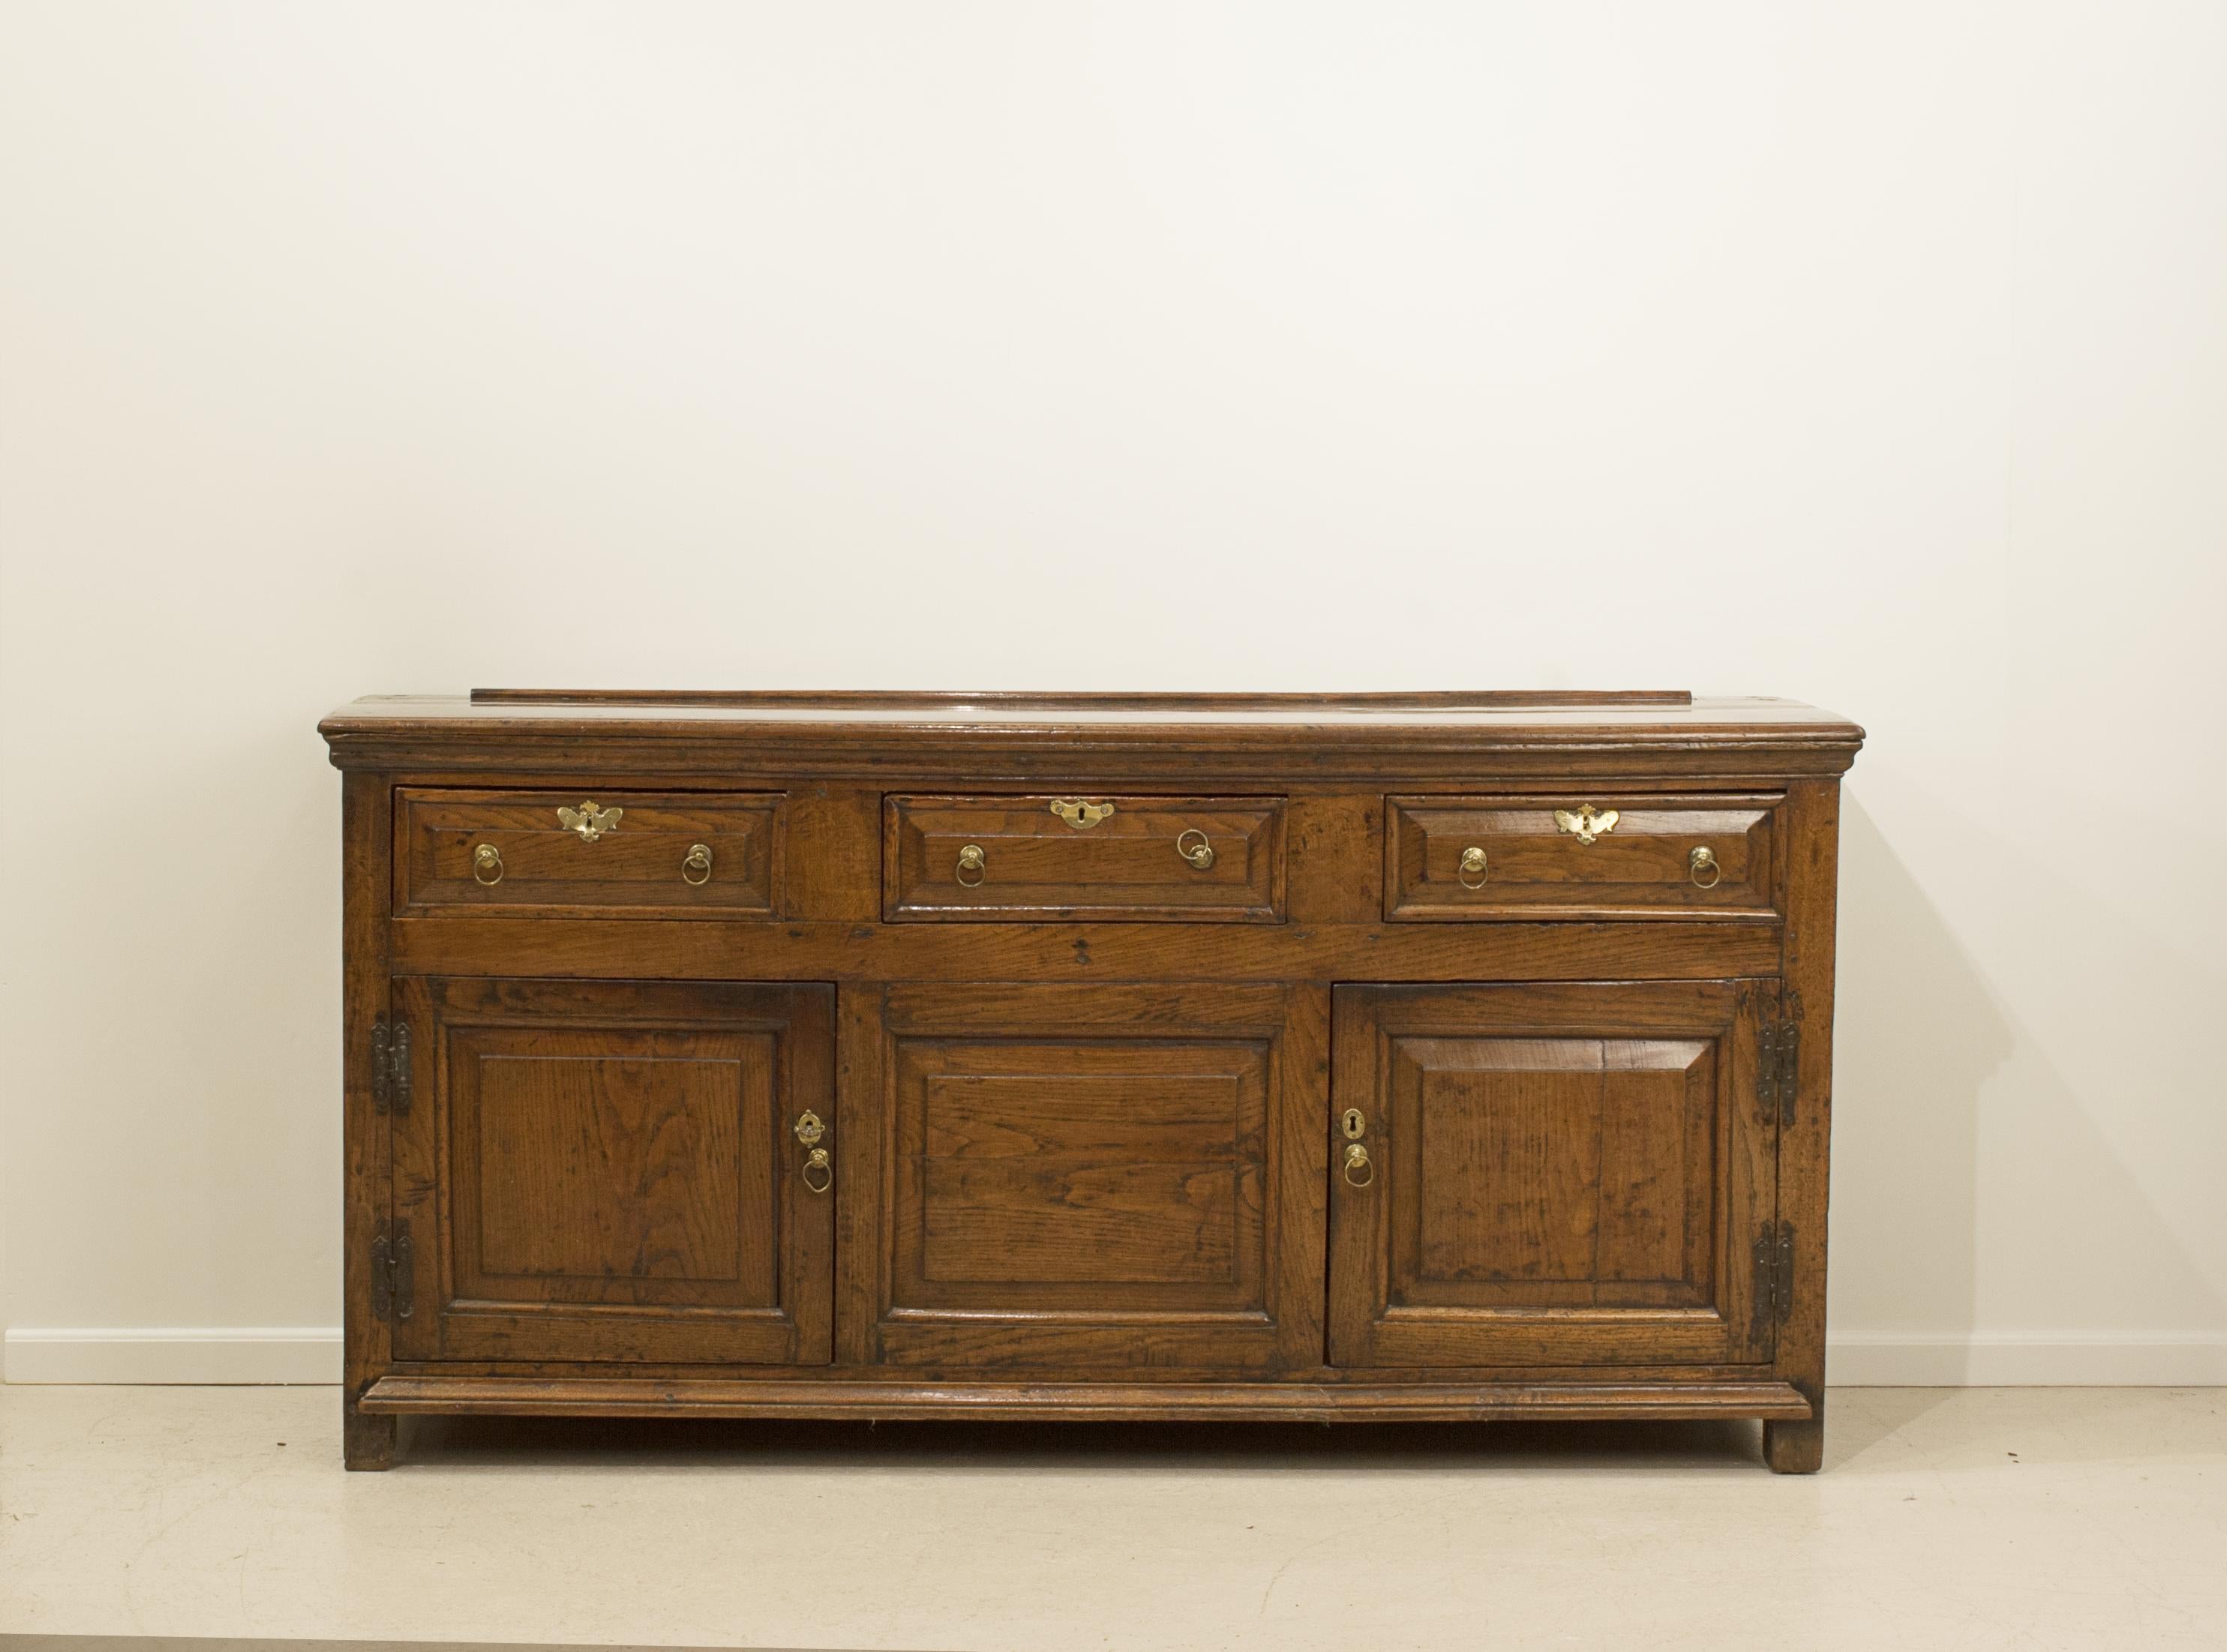 Antique oak sideboard.
A superb early 19th century antique welsh oak dresser base, sideboard. The dresser base with three drawers over two cupboards with fielded panel doors. The sideboard with brass handles and the top with plate rack. Raised on